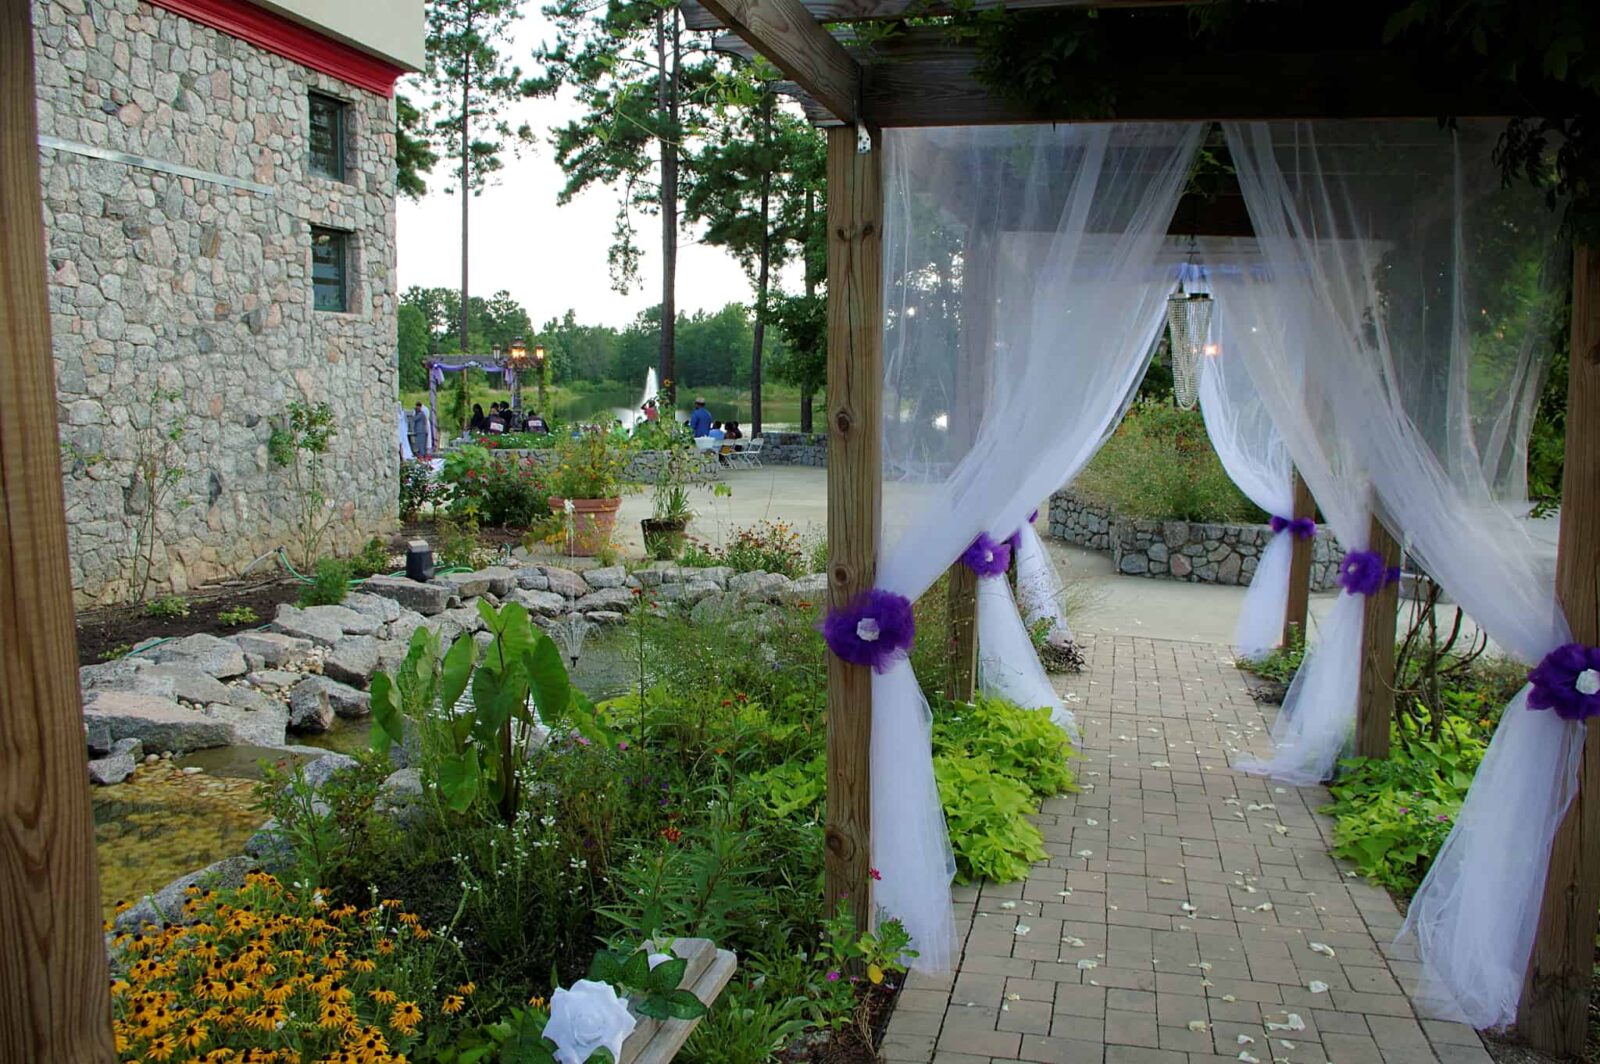 A wedding venue with purple flowers and white curtains.